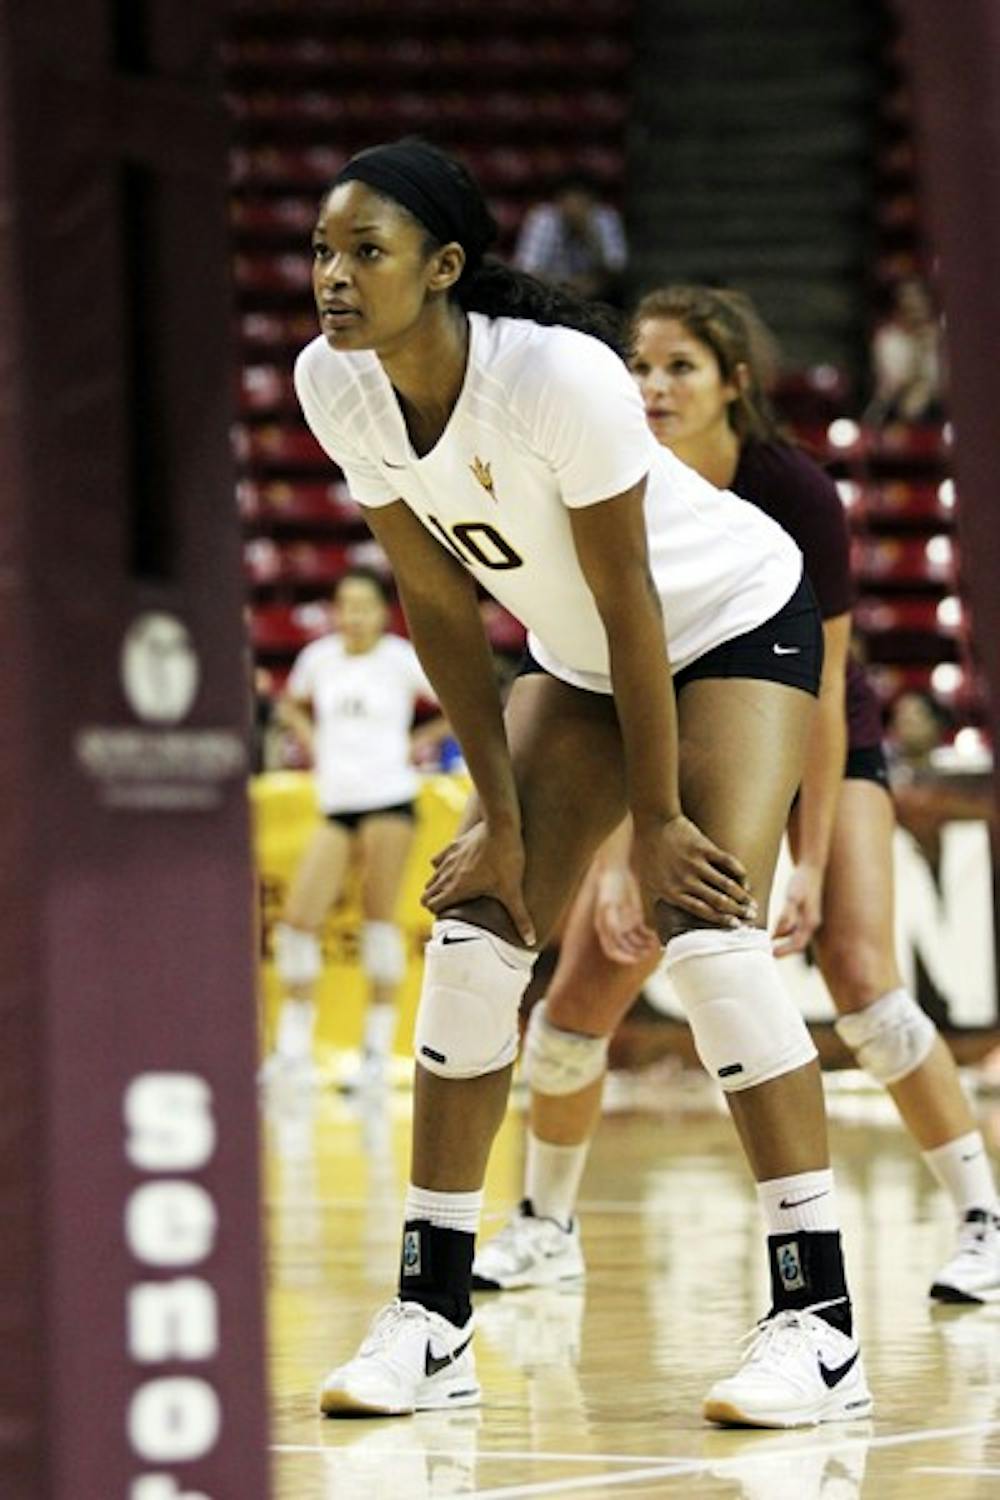 Senior Erica Wilson totaled 522 kills in only her first year as an outside hitter, placing her fifth all-time for ASU kills in a season. Wilson moved from middle blocker prior to the season. (Photo by Kyle Newman)